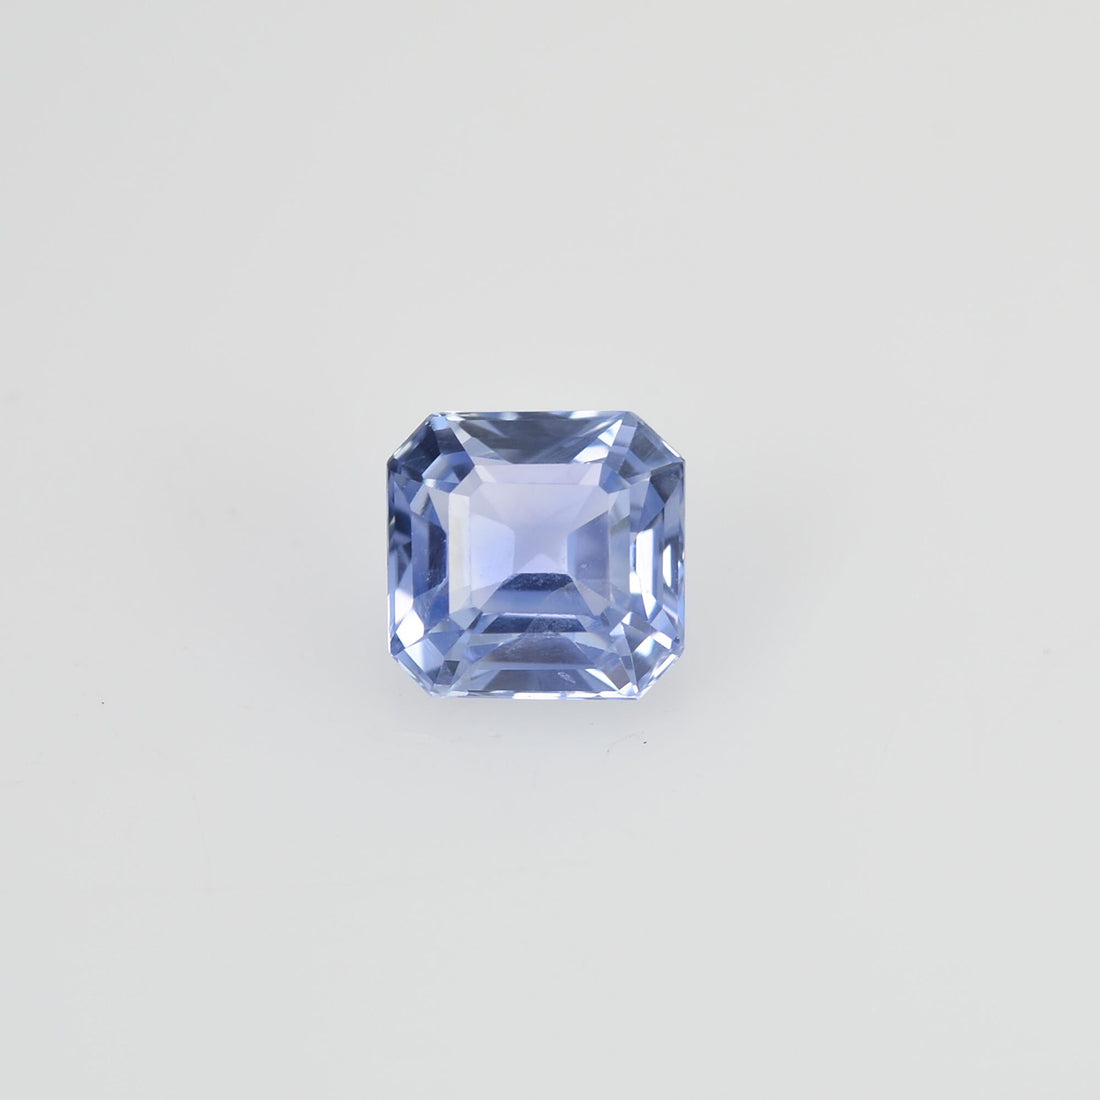 0.85 cts Unheated Natural Blue Sapphire Loose Gemstone Octagon Cut